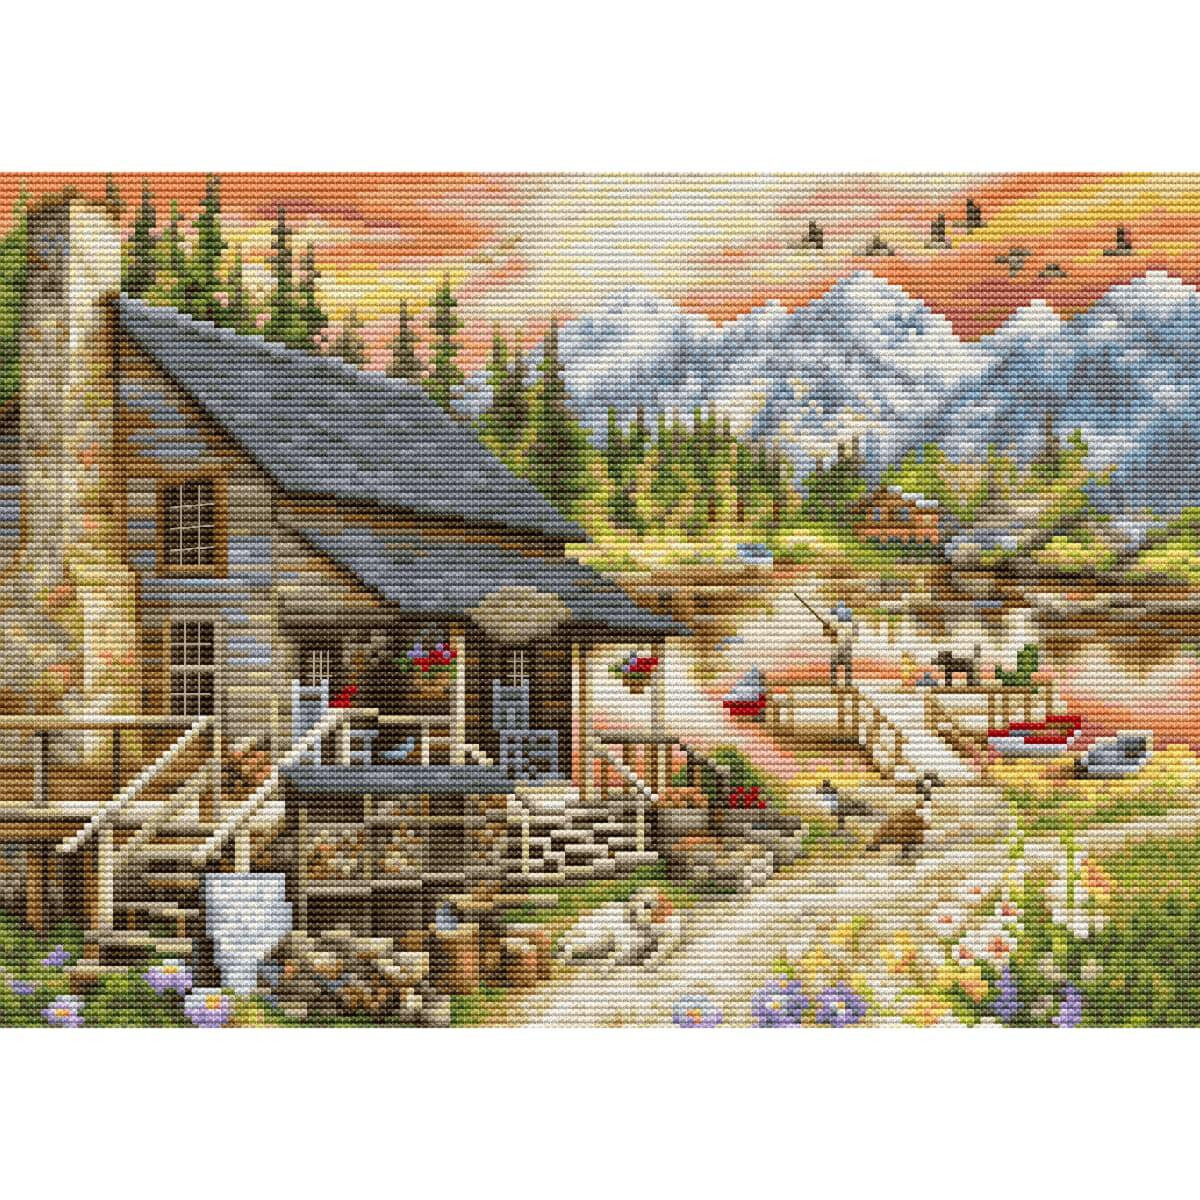 Luca-S counted cross stitch kit "Log Cabin Genenal...